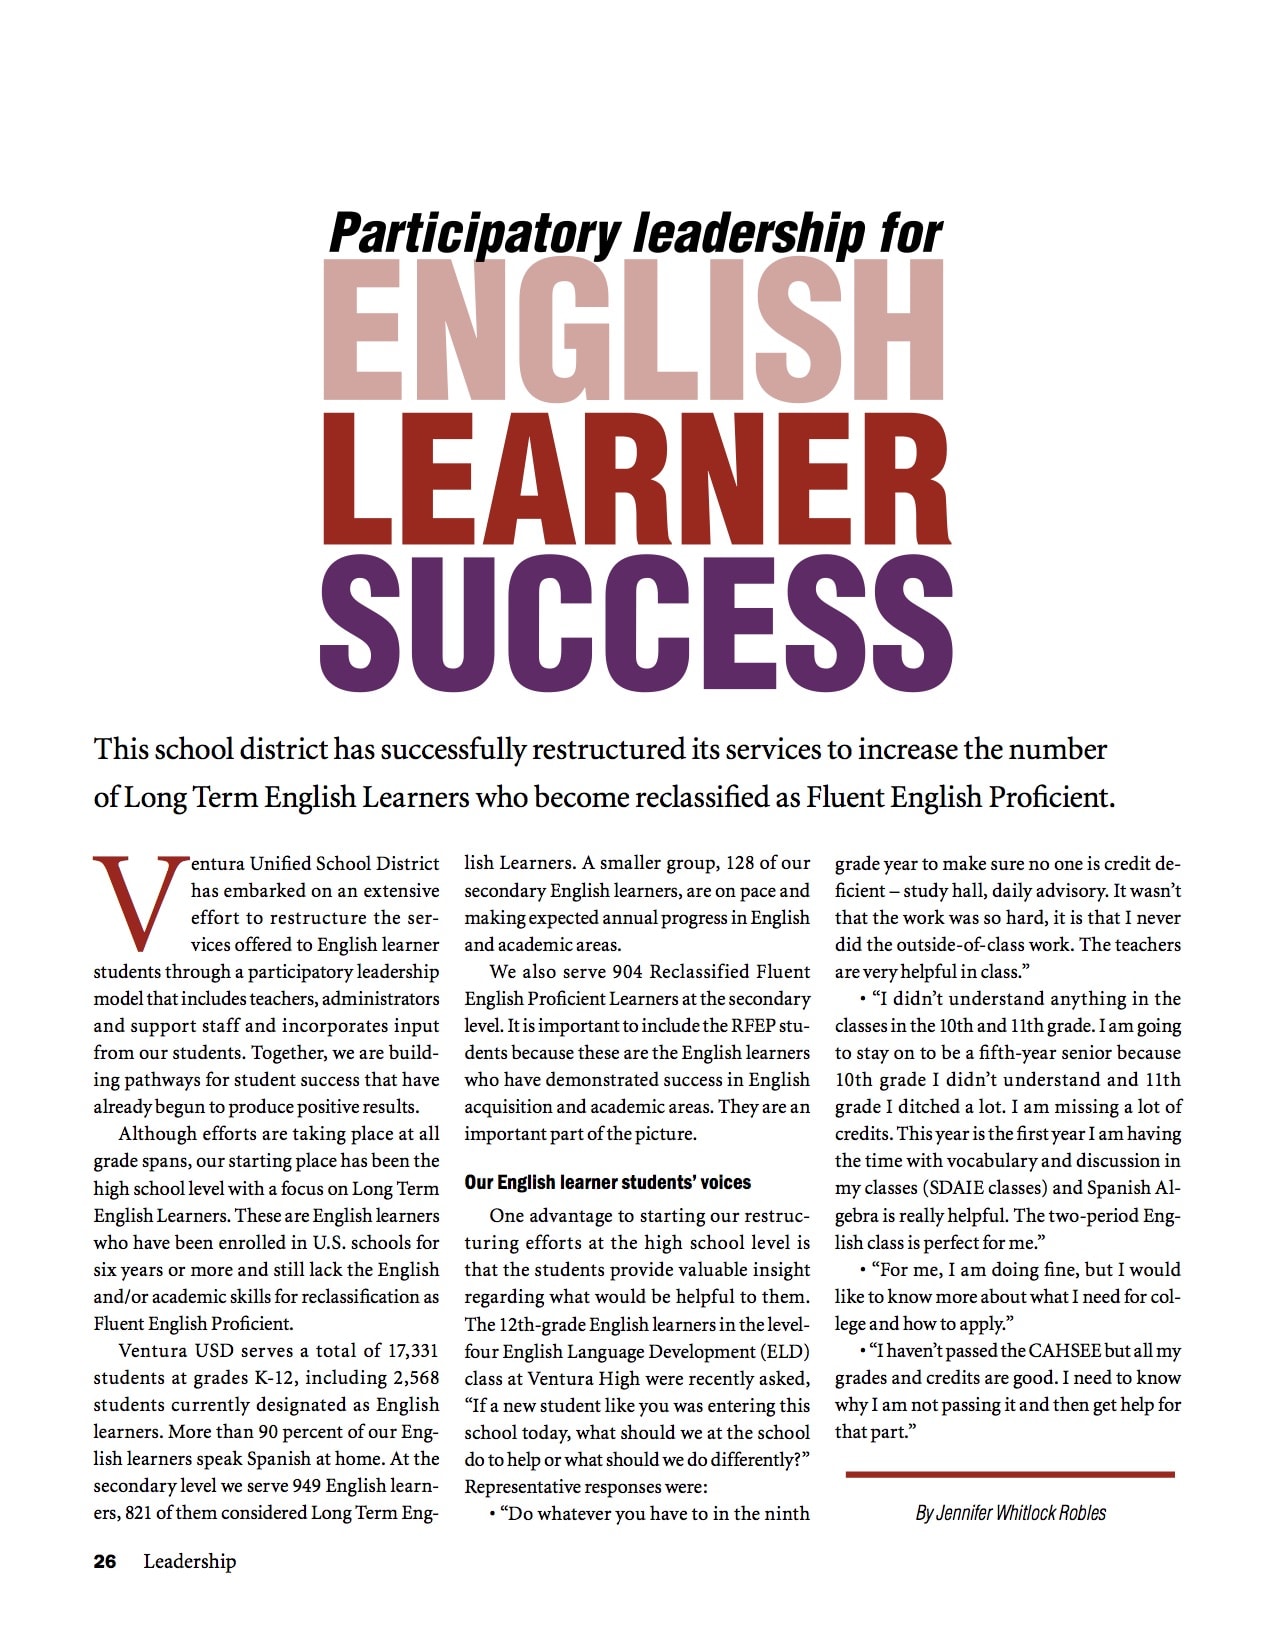 Participatory Leadership for English Learner Success